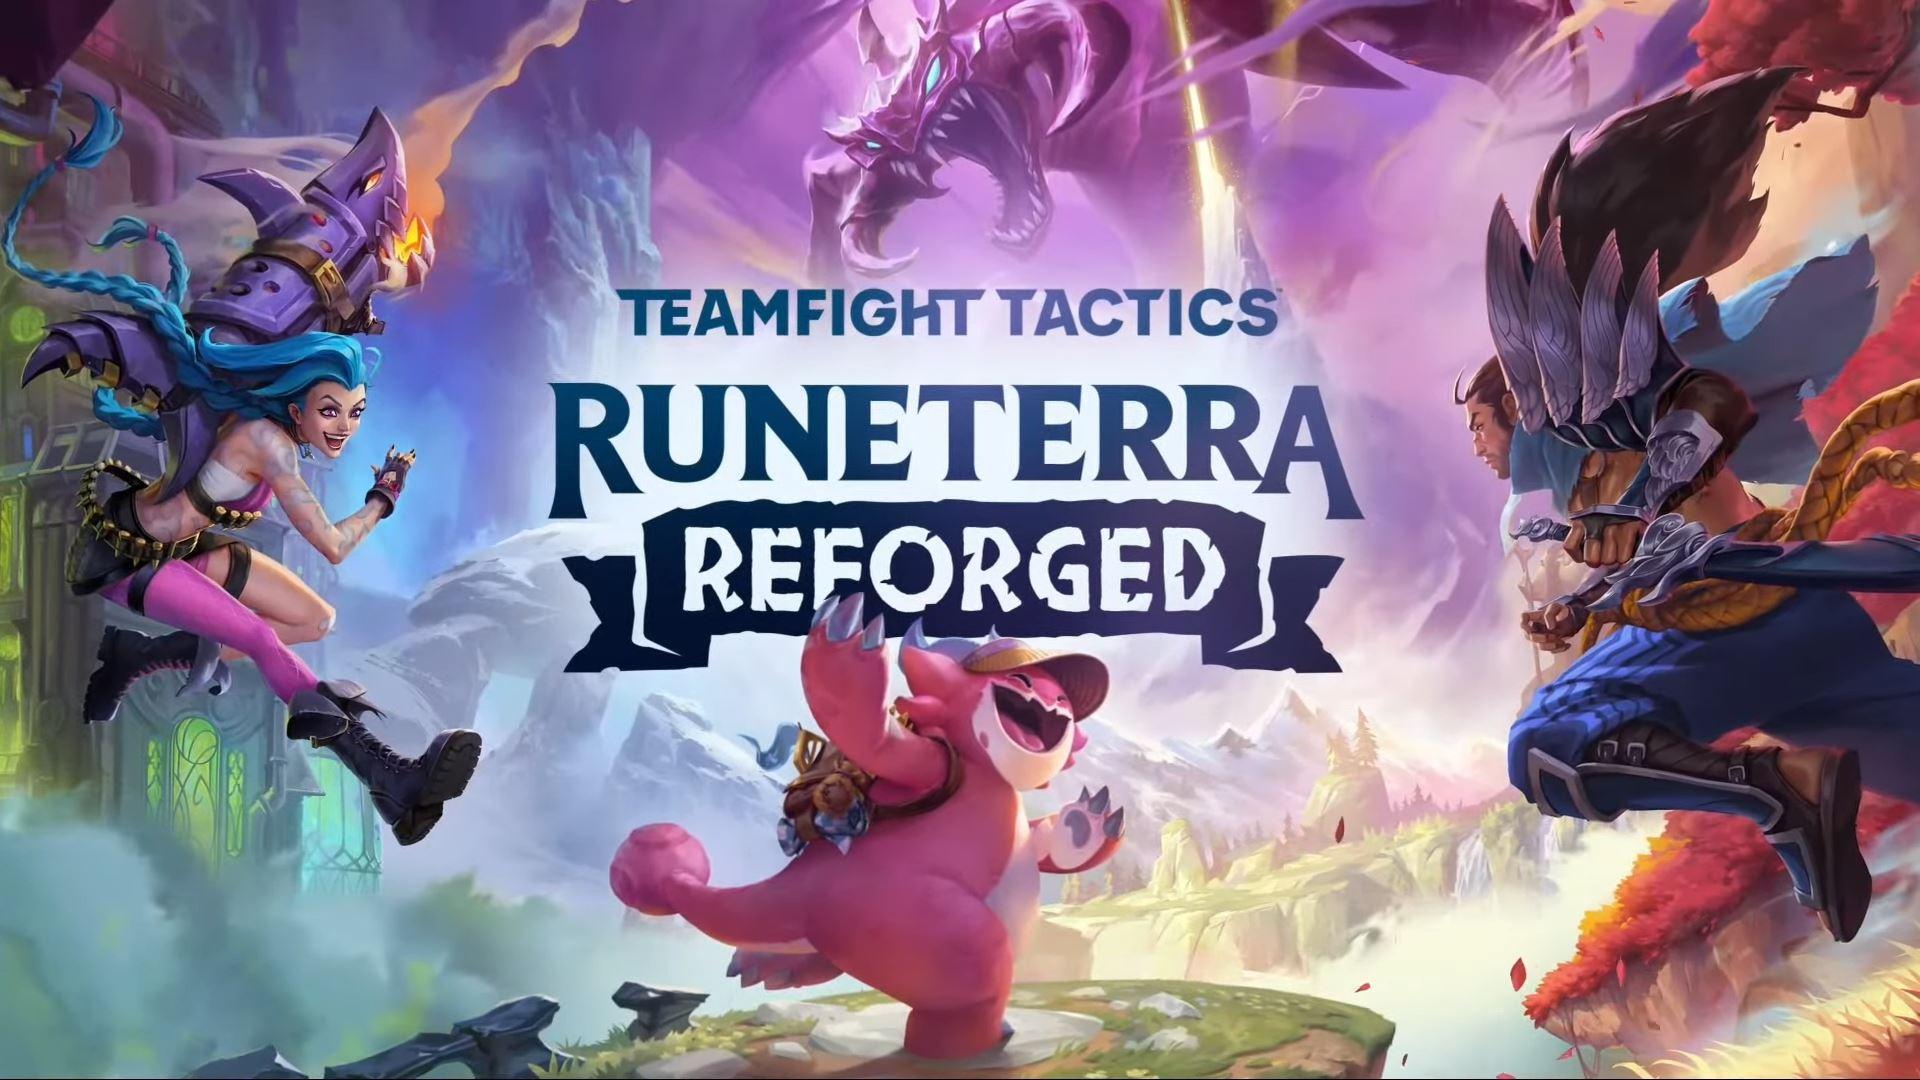 Everything to learn about TFT Set 9 - Runeterra Reforged